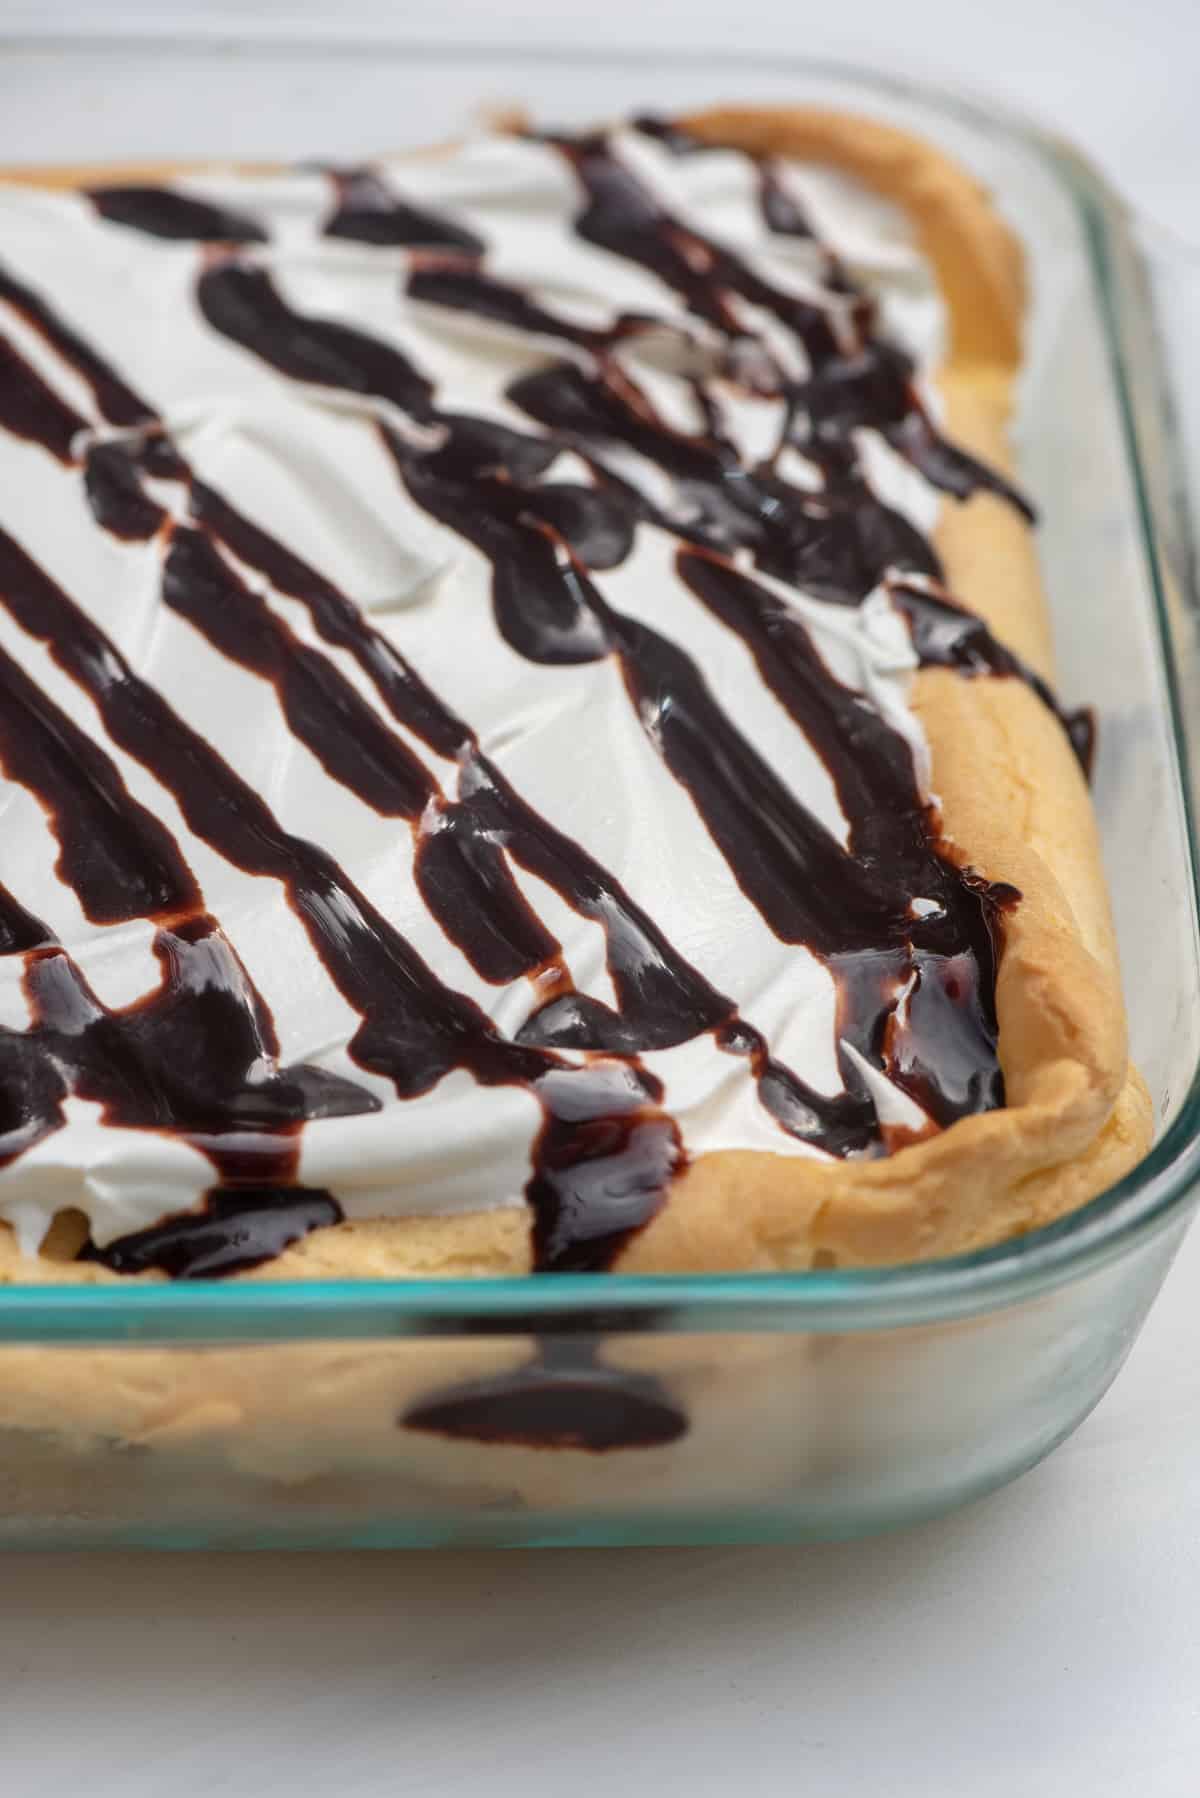 A creamy dessert in a glass baking dish topped with fudge sauce.